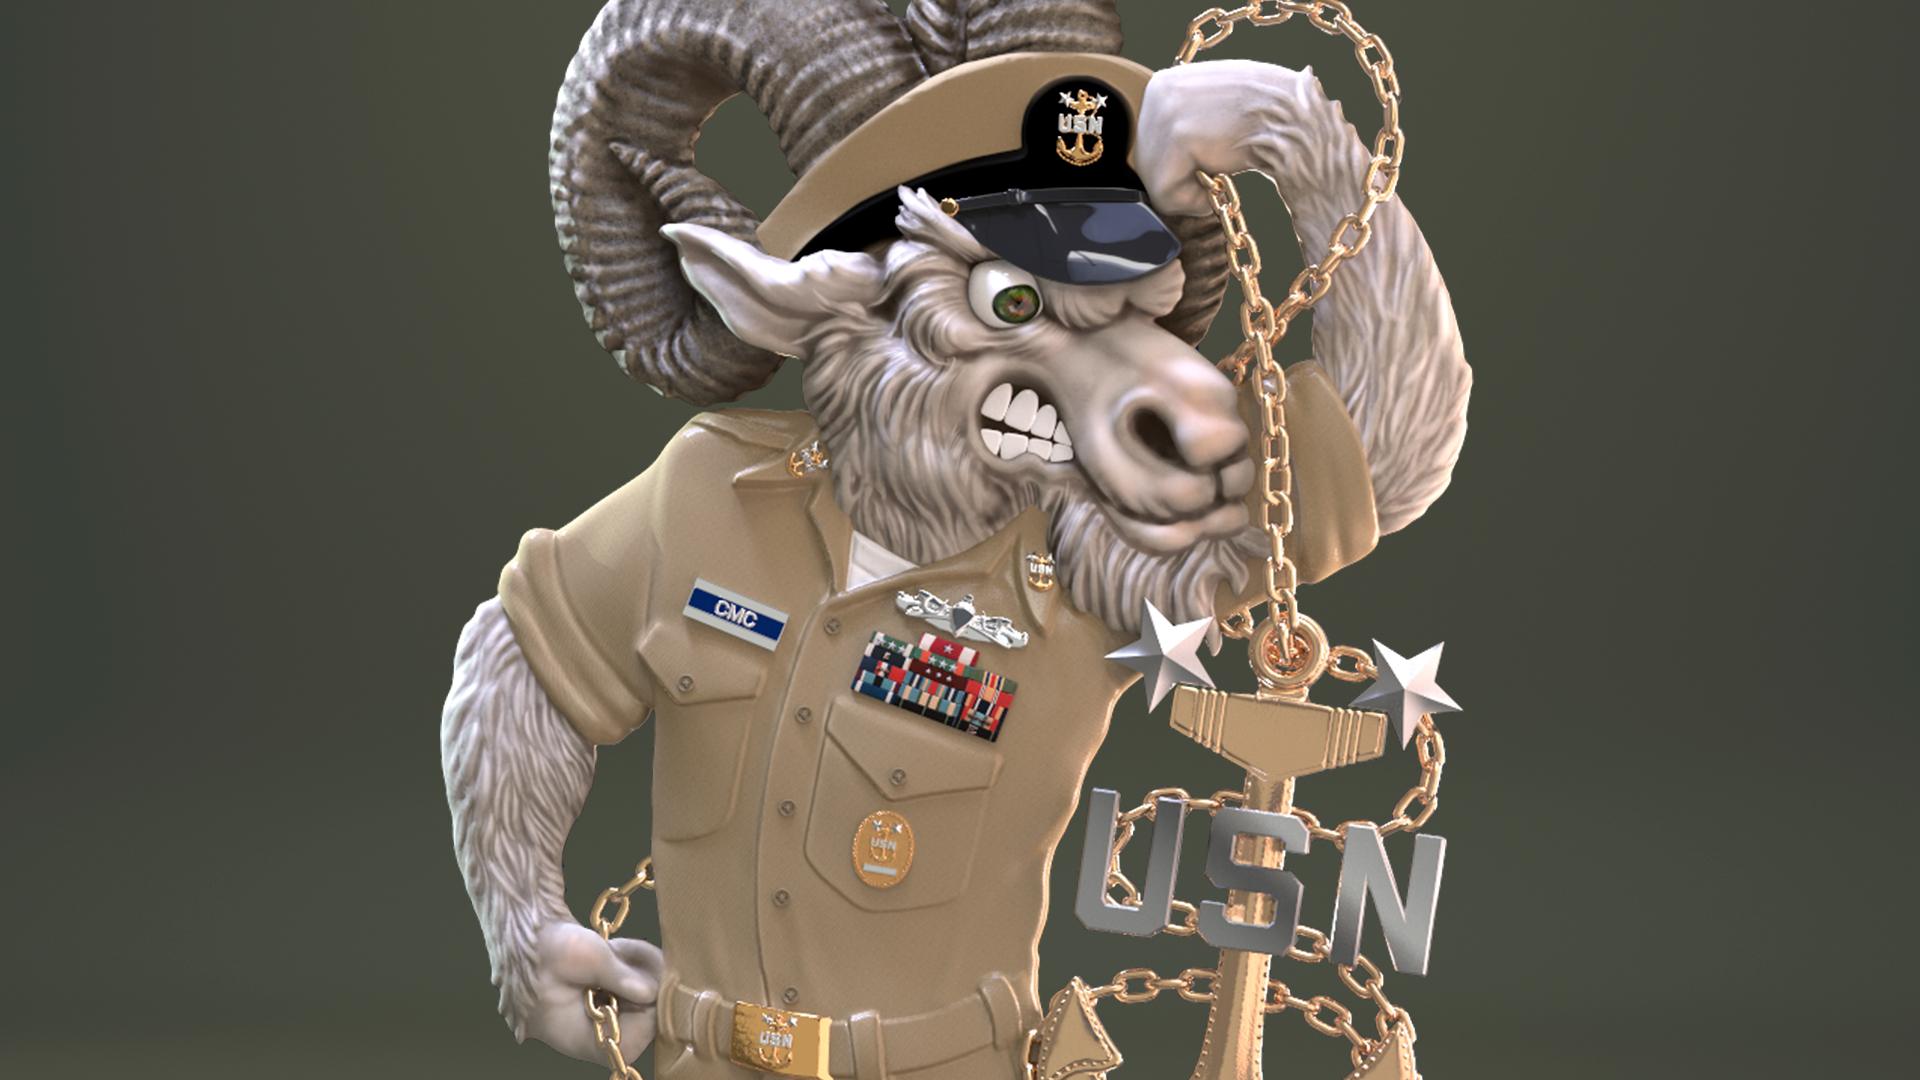 Ram for the U.S. Navy